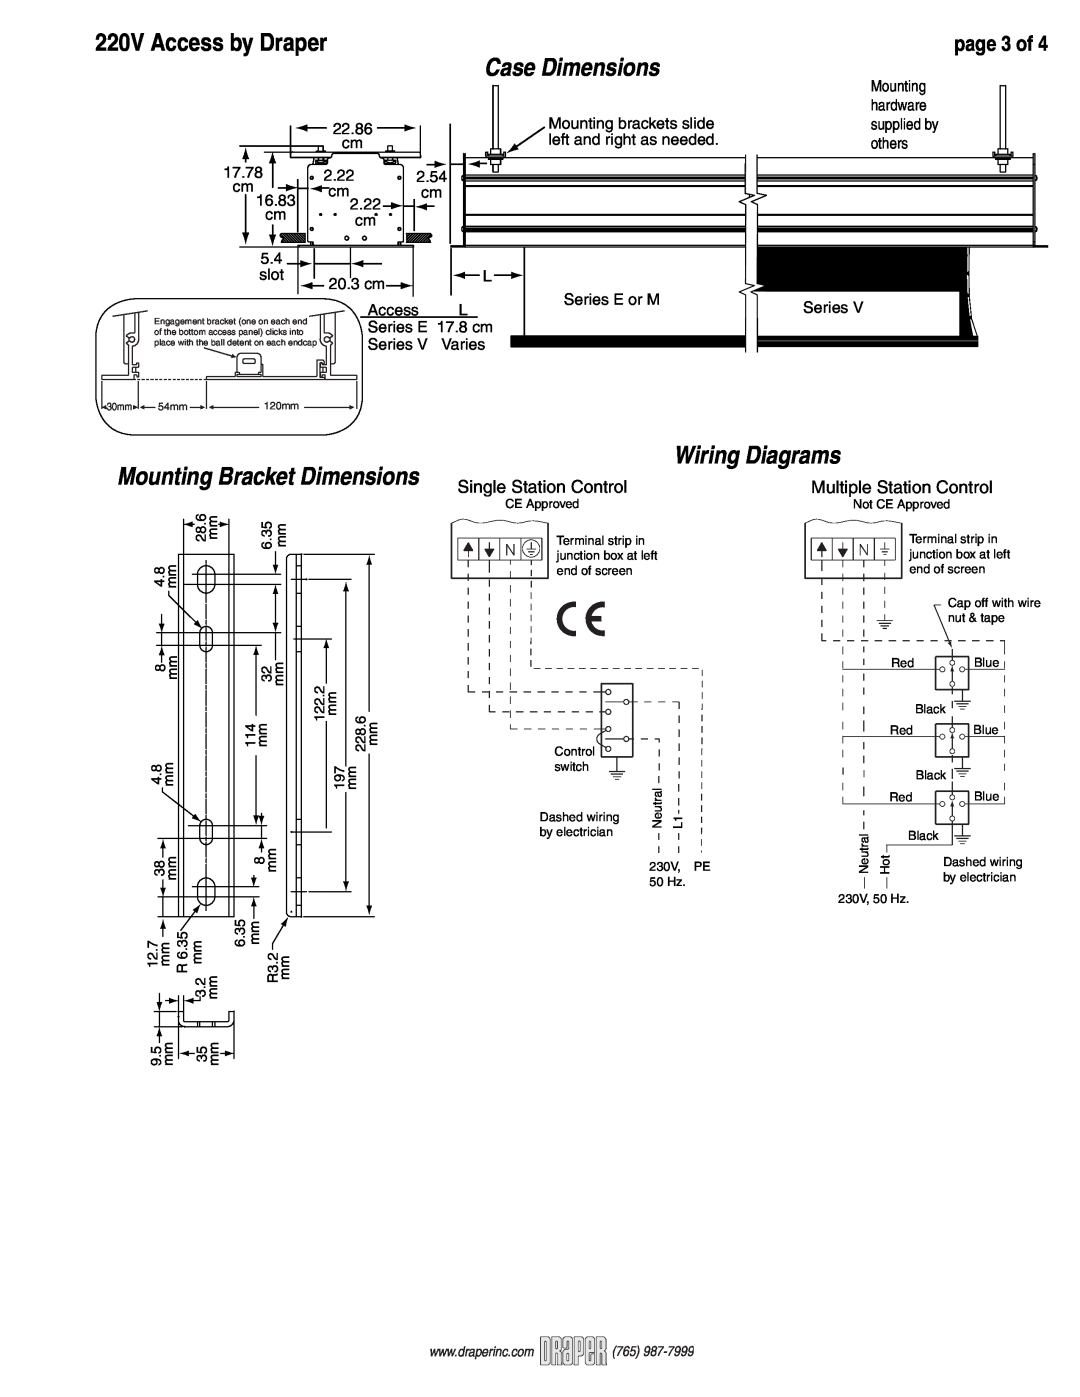 Draper 220V Access Electric Projection Screen Case Dimensions, Wiring Diagrams, page 3 of, 220V Access by Draper 